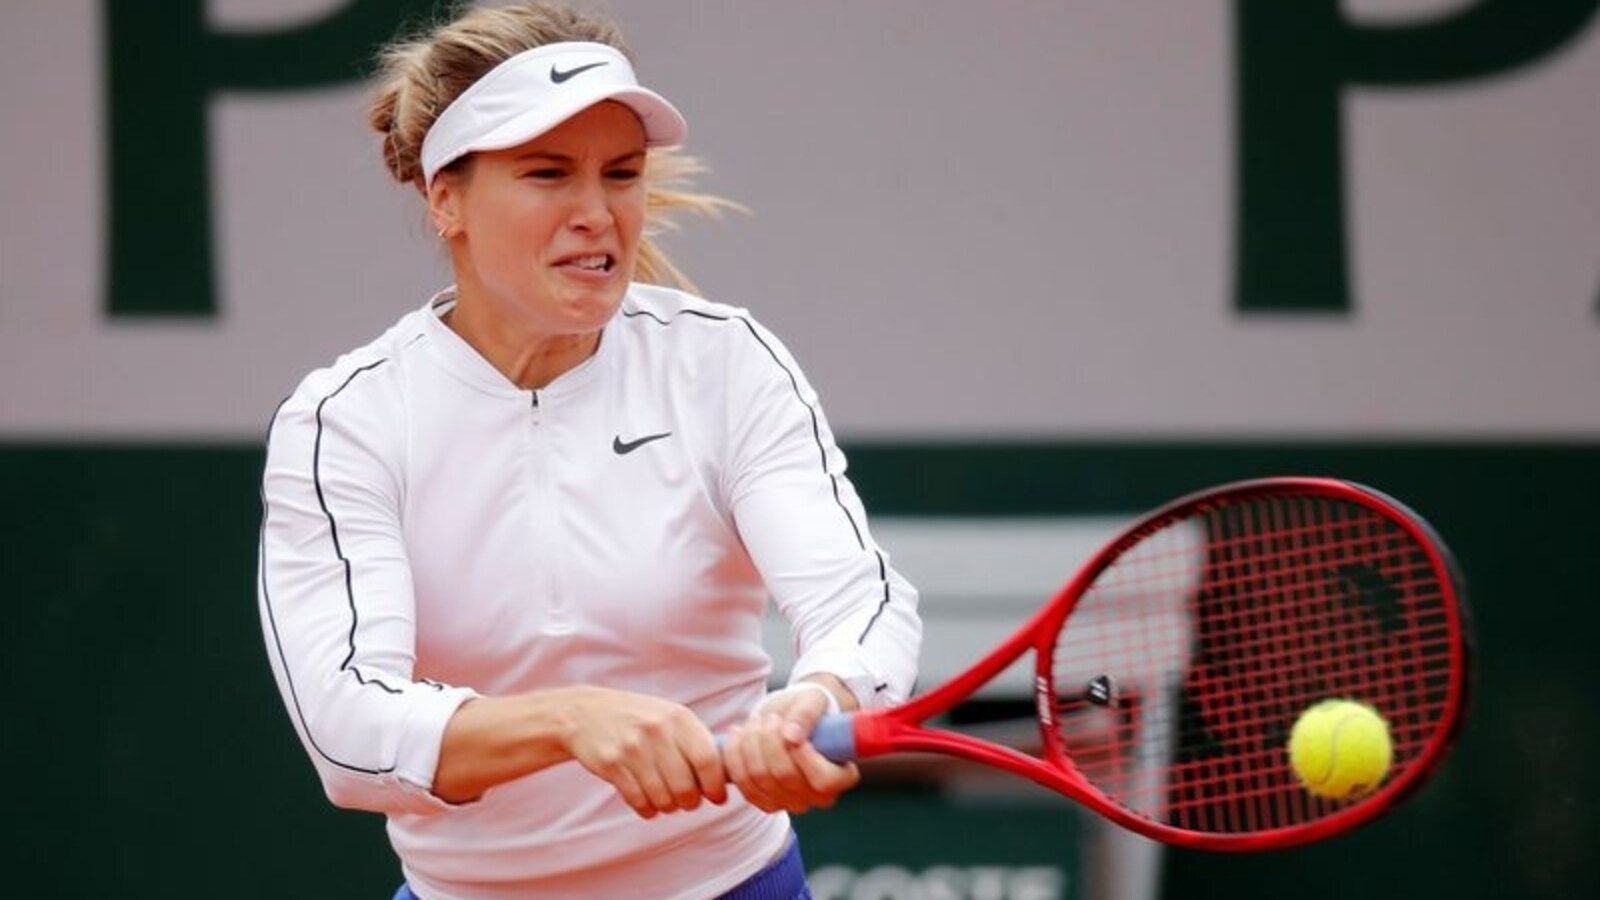 With no rankings points on offer, Bouchard pulls out of Wimbledon